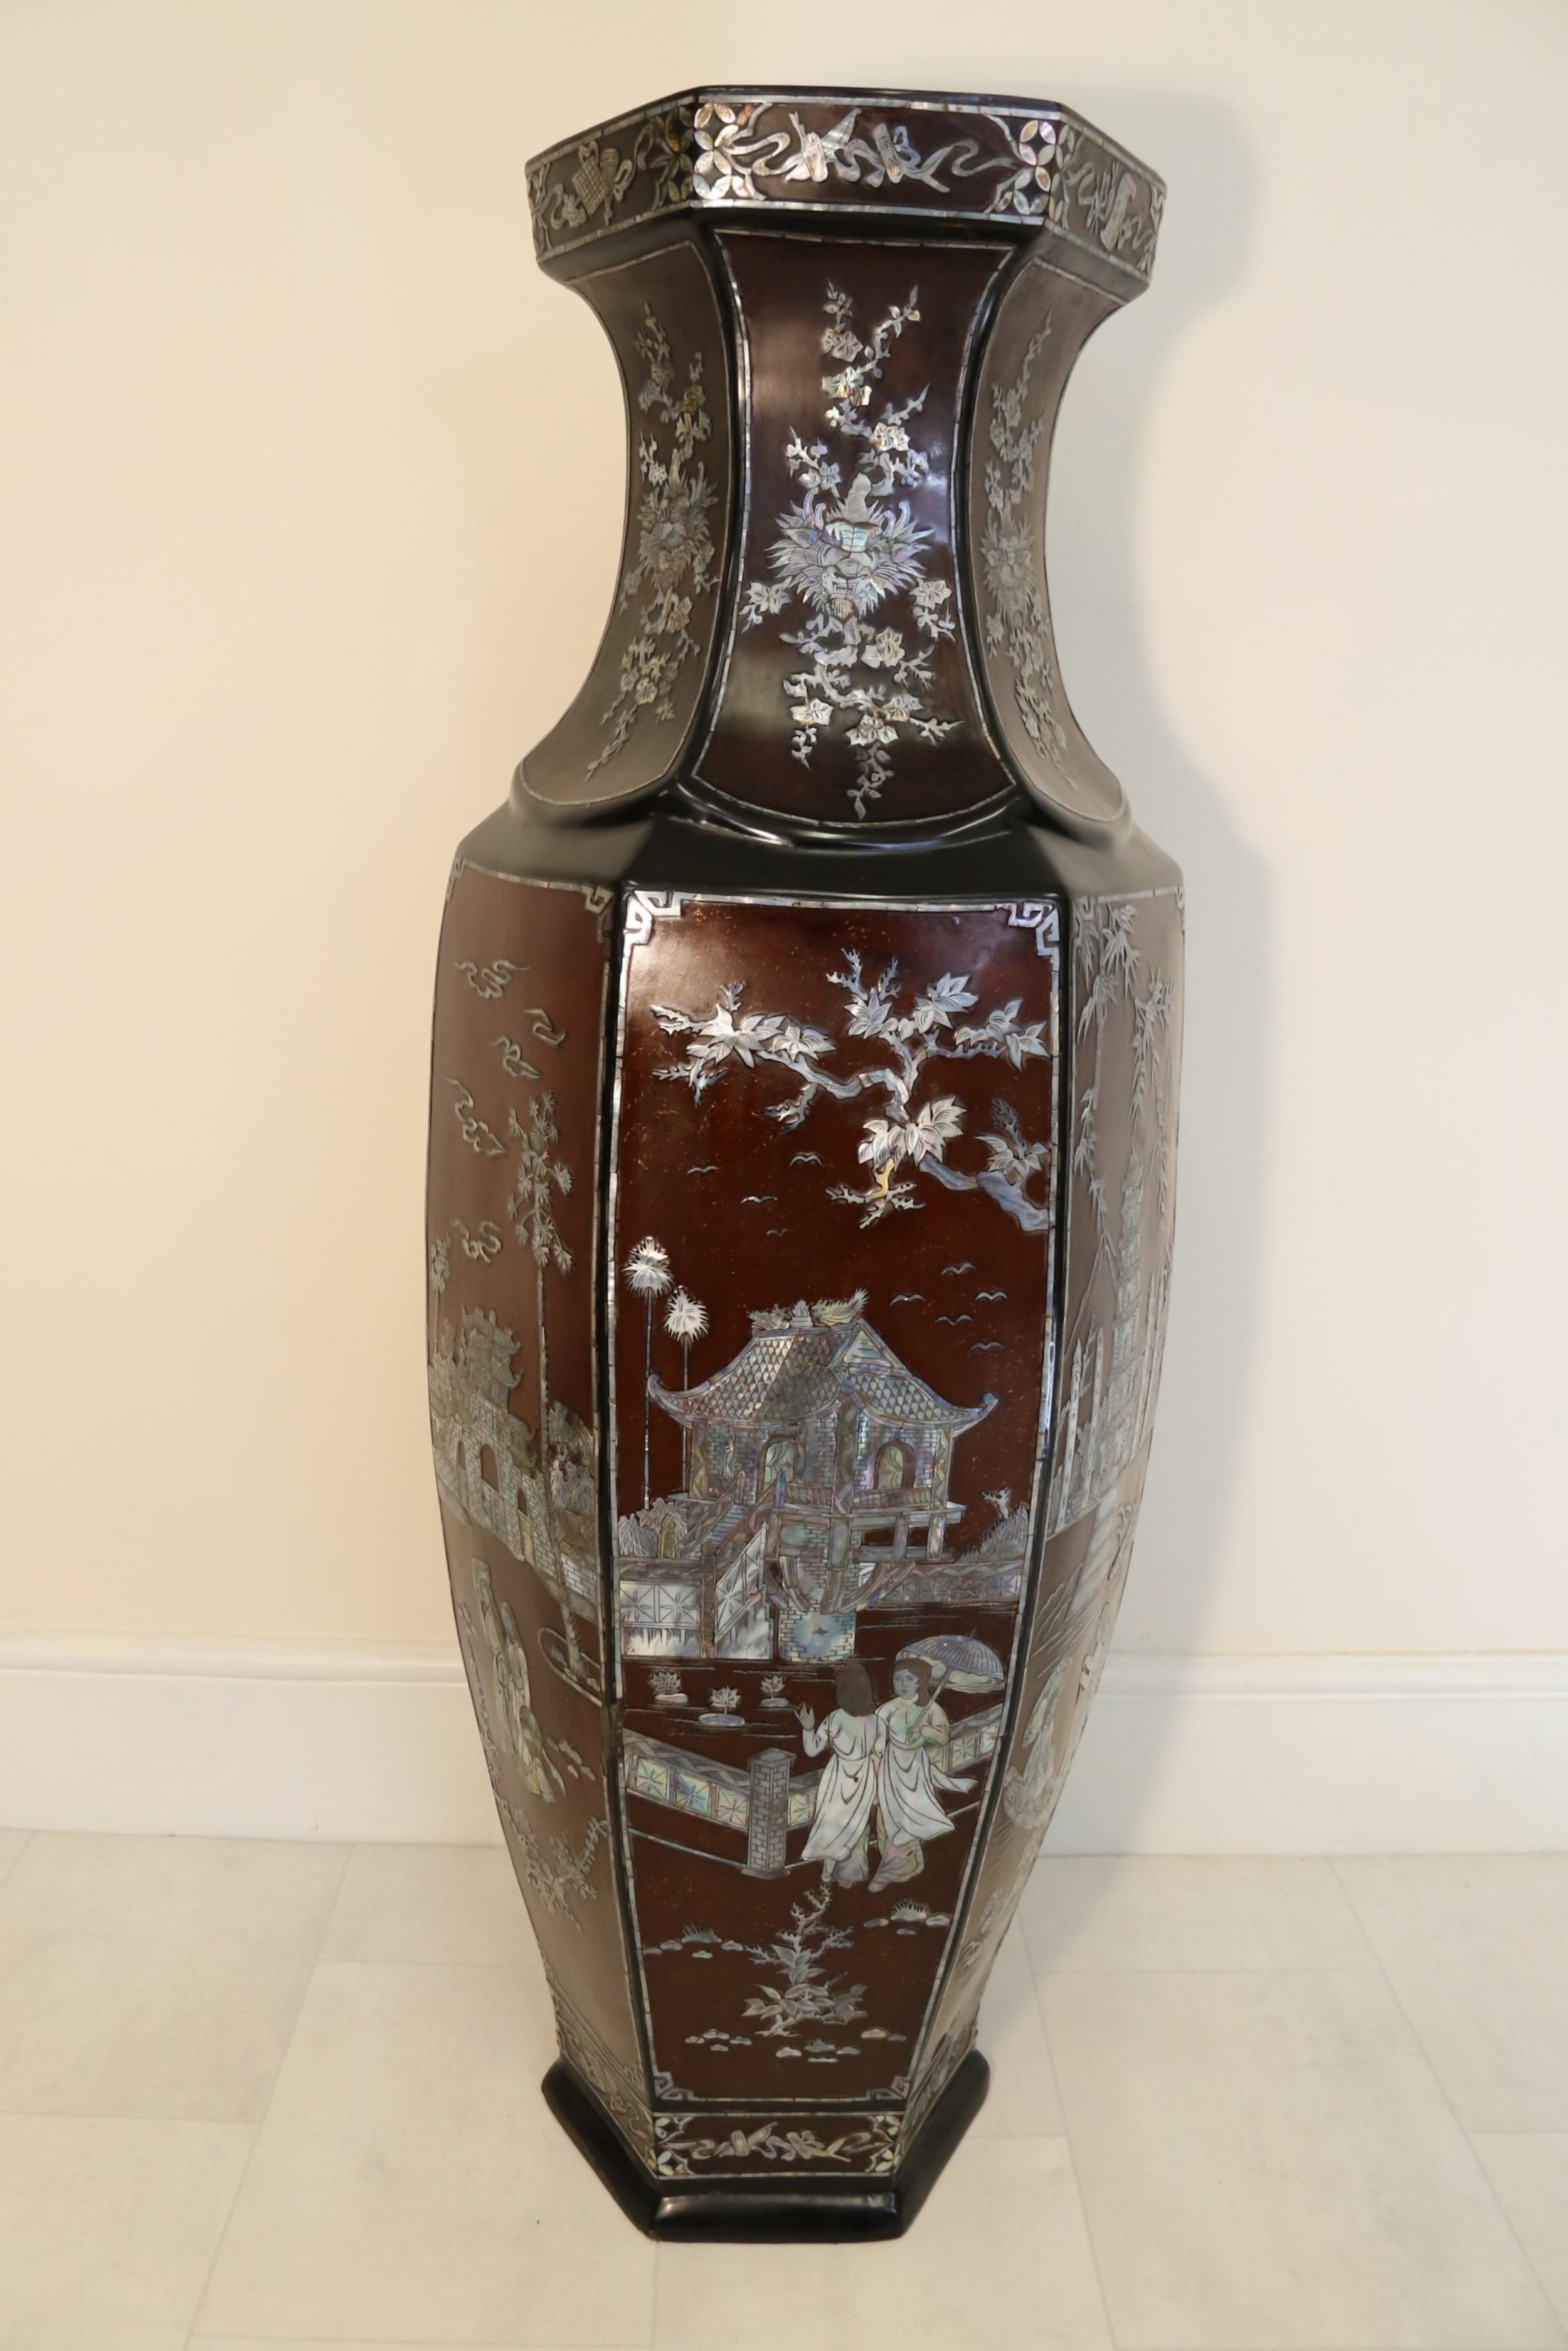 This remarkable Chinese lacquer vase dates to the Republican period, circa 1930.

It is made from papier-mache with a black ground with panels of brown lacquer inlaid throughout with cut and engraved mother of pearl.

The vase is of hexagonal